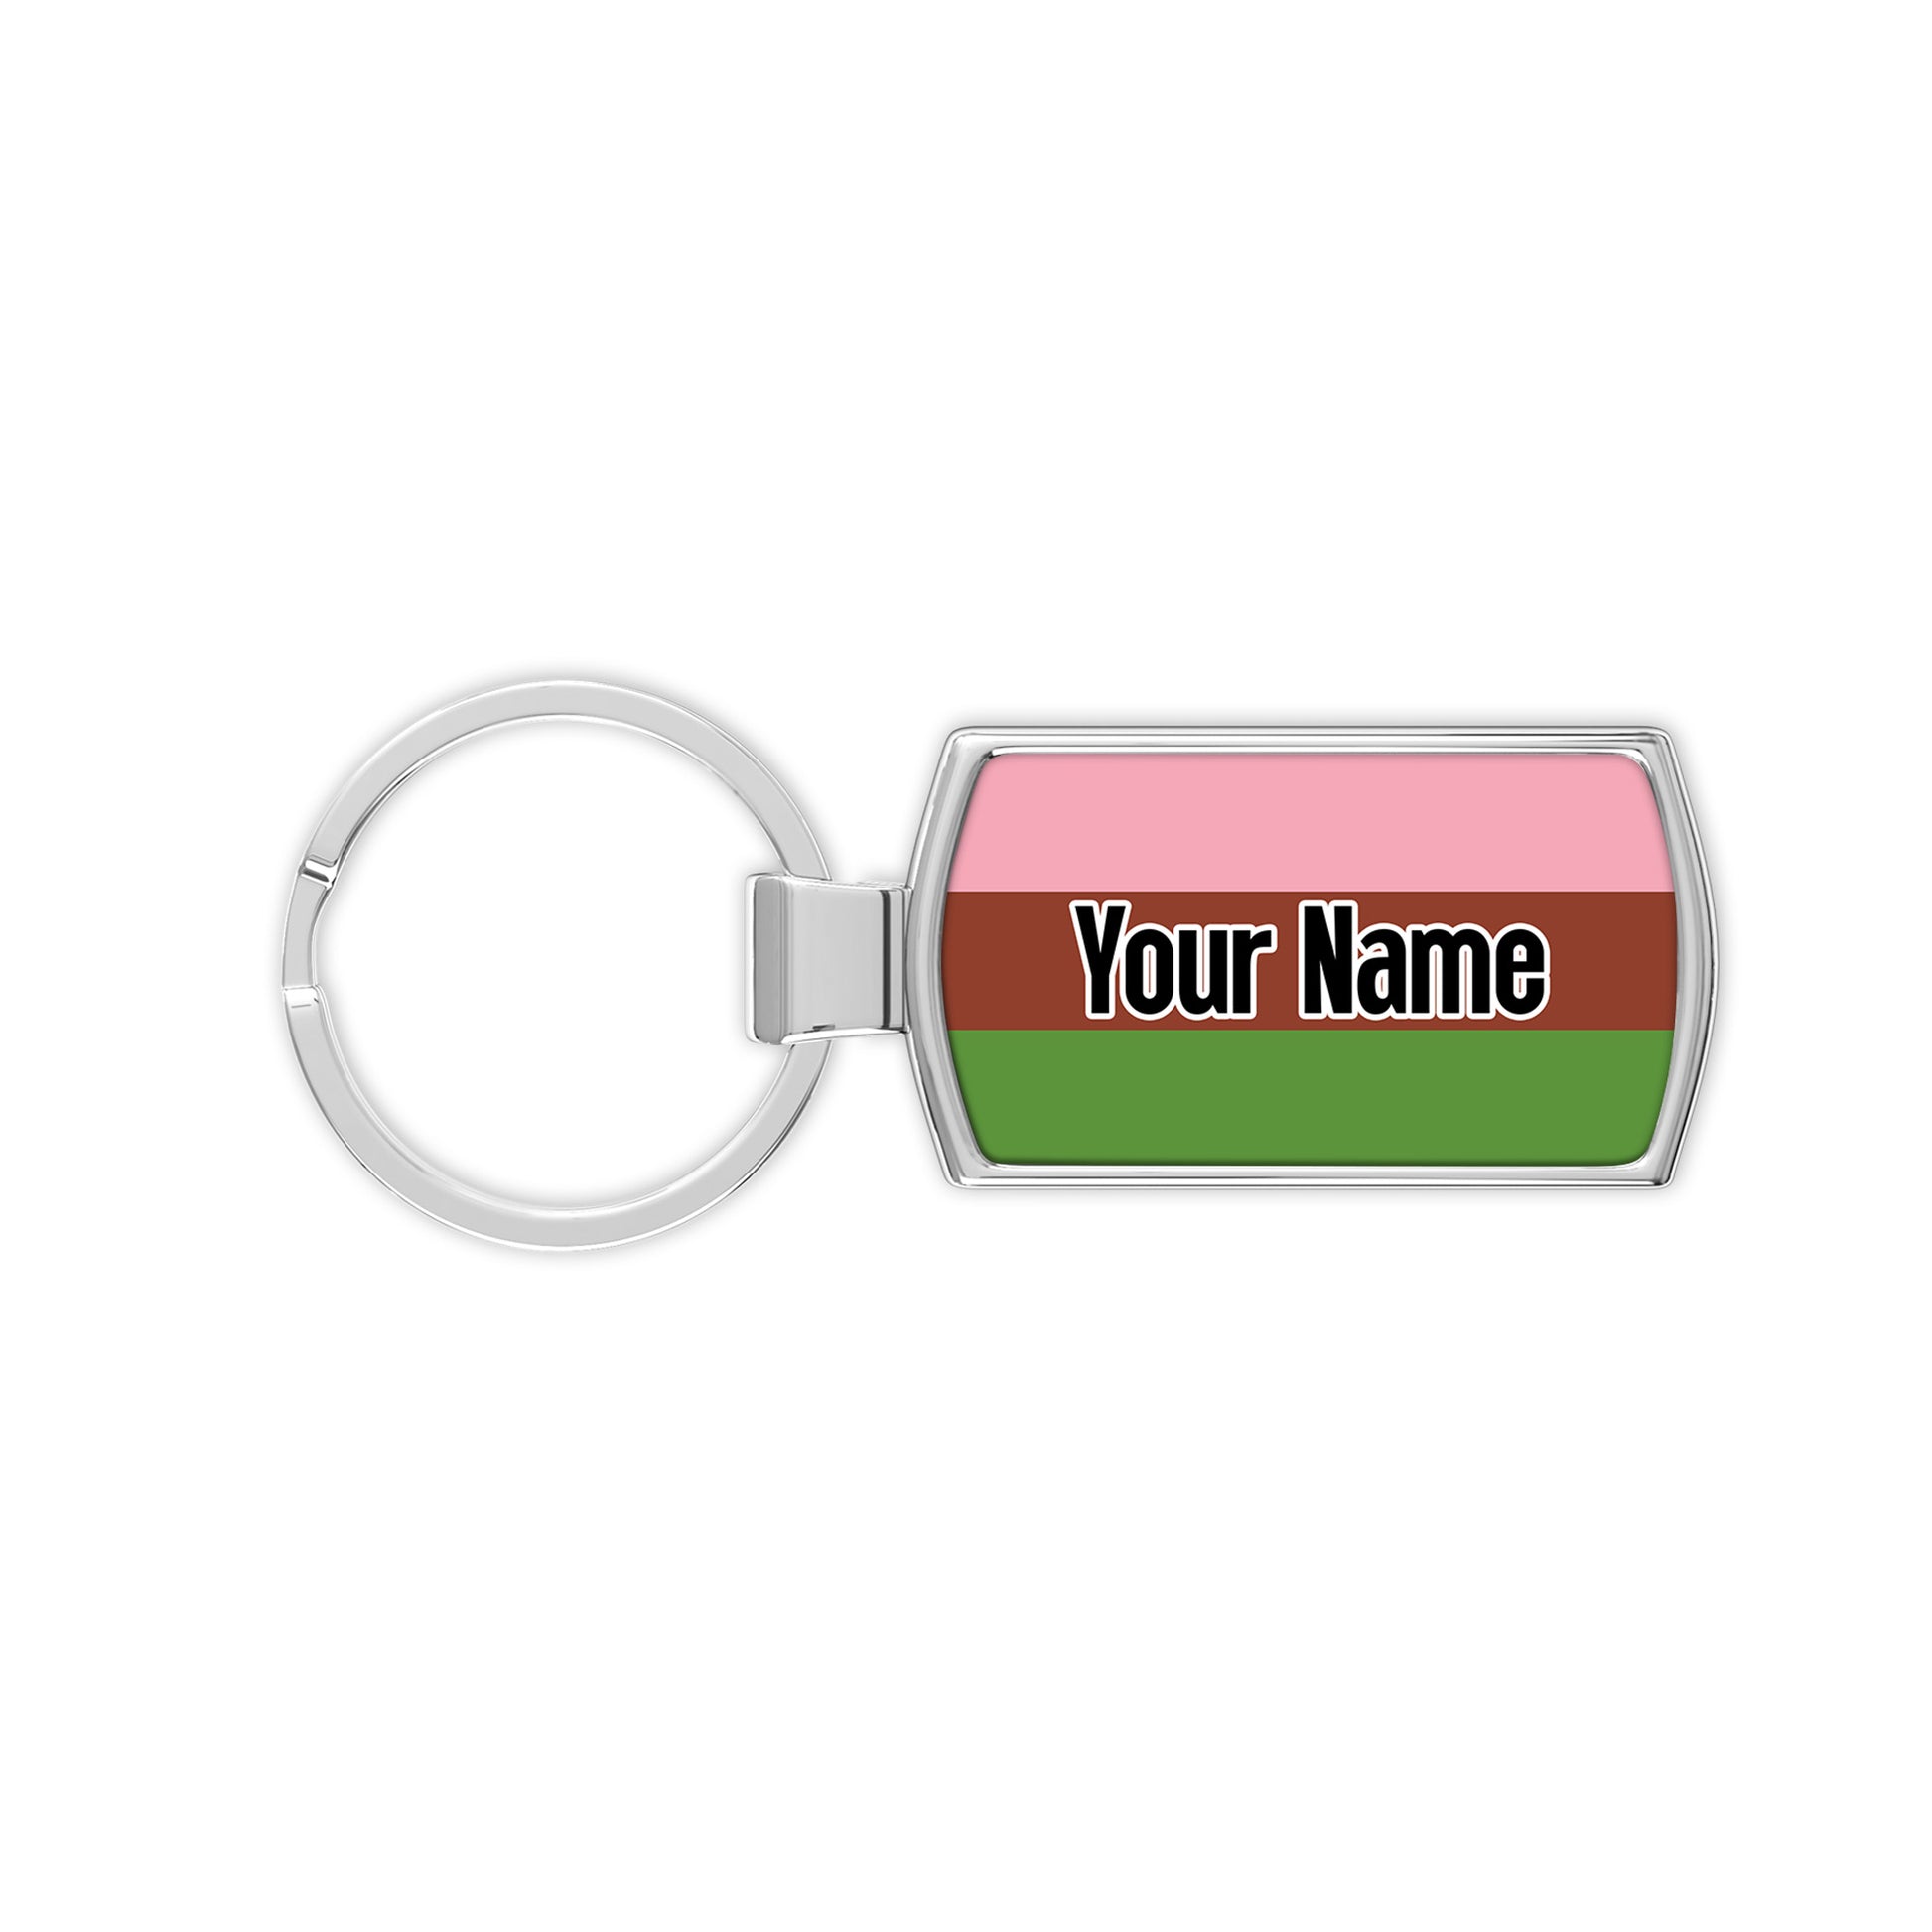 Gynosexual pride flag metal keyring personalised with your name